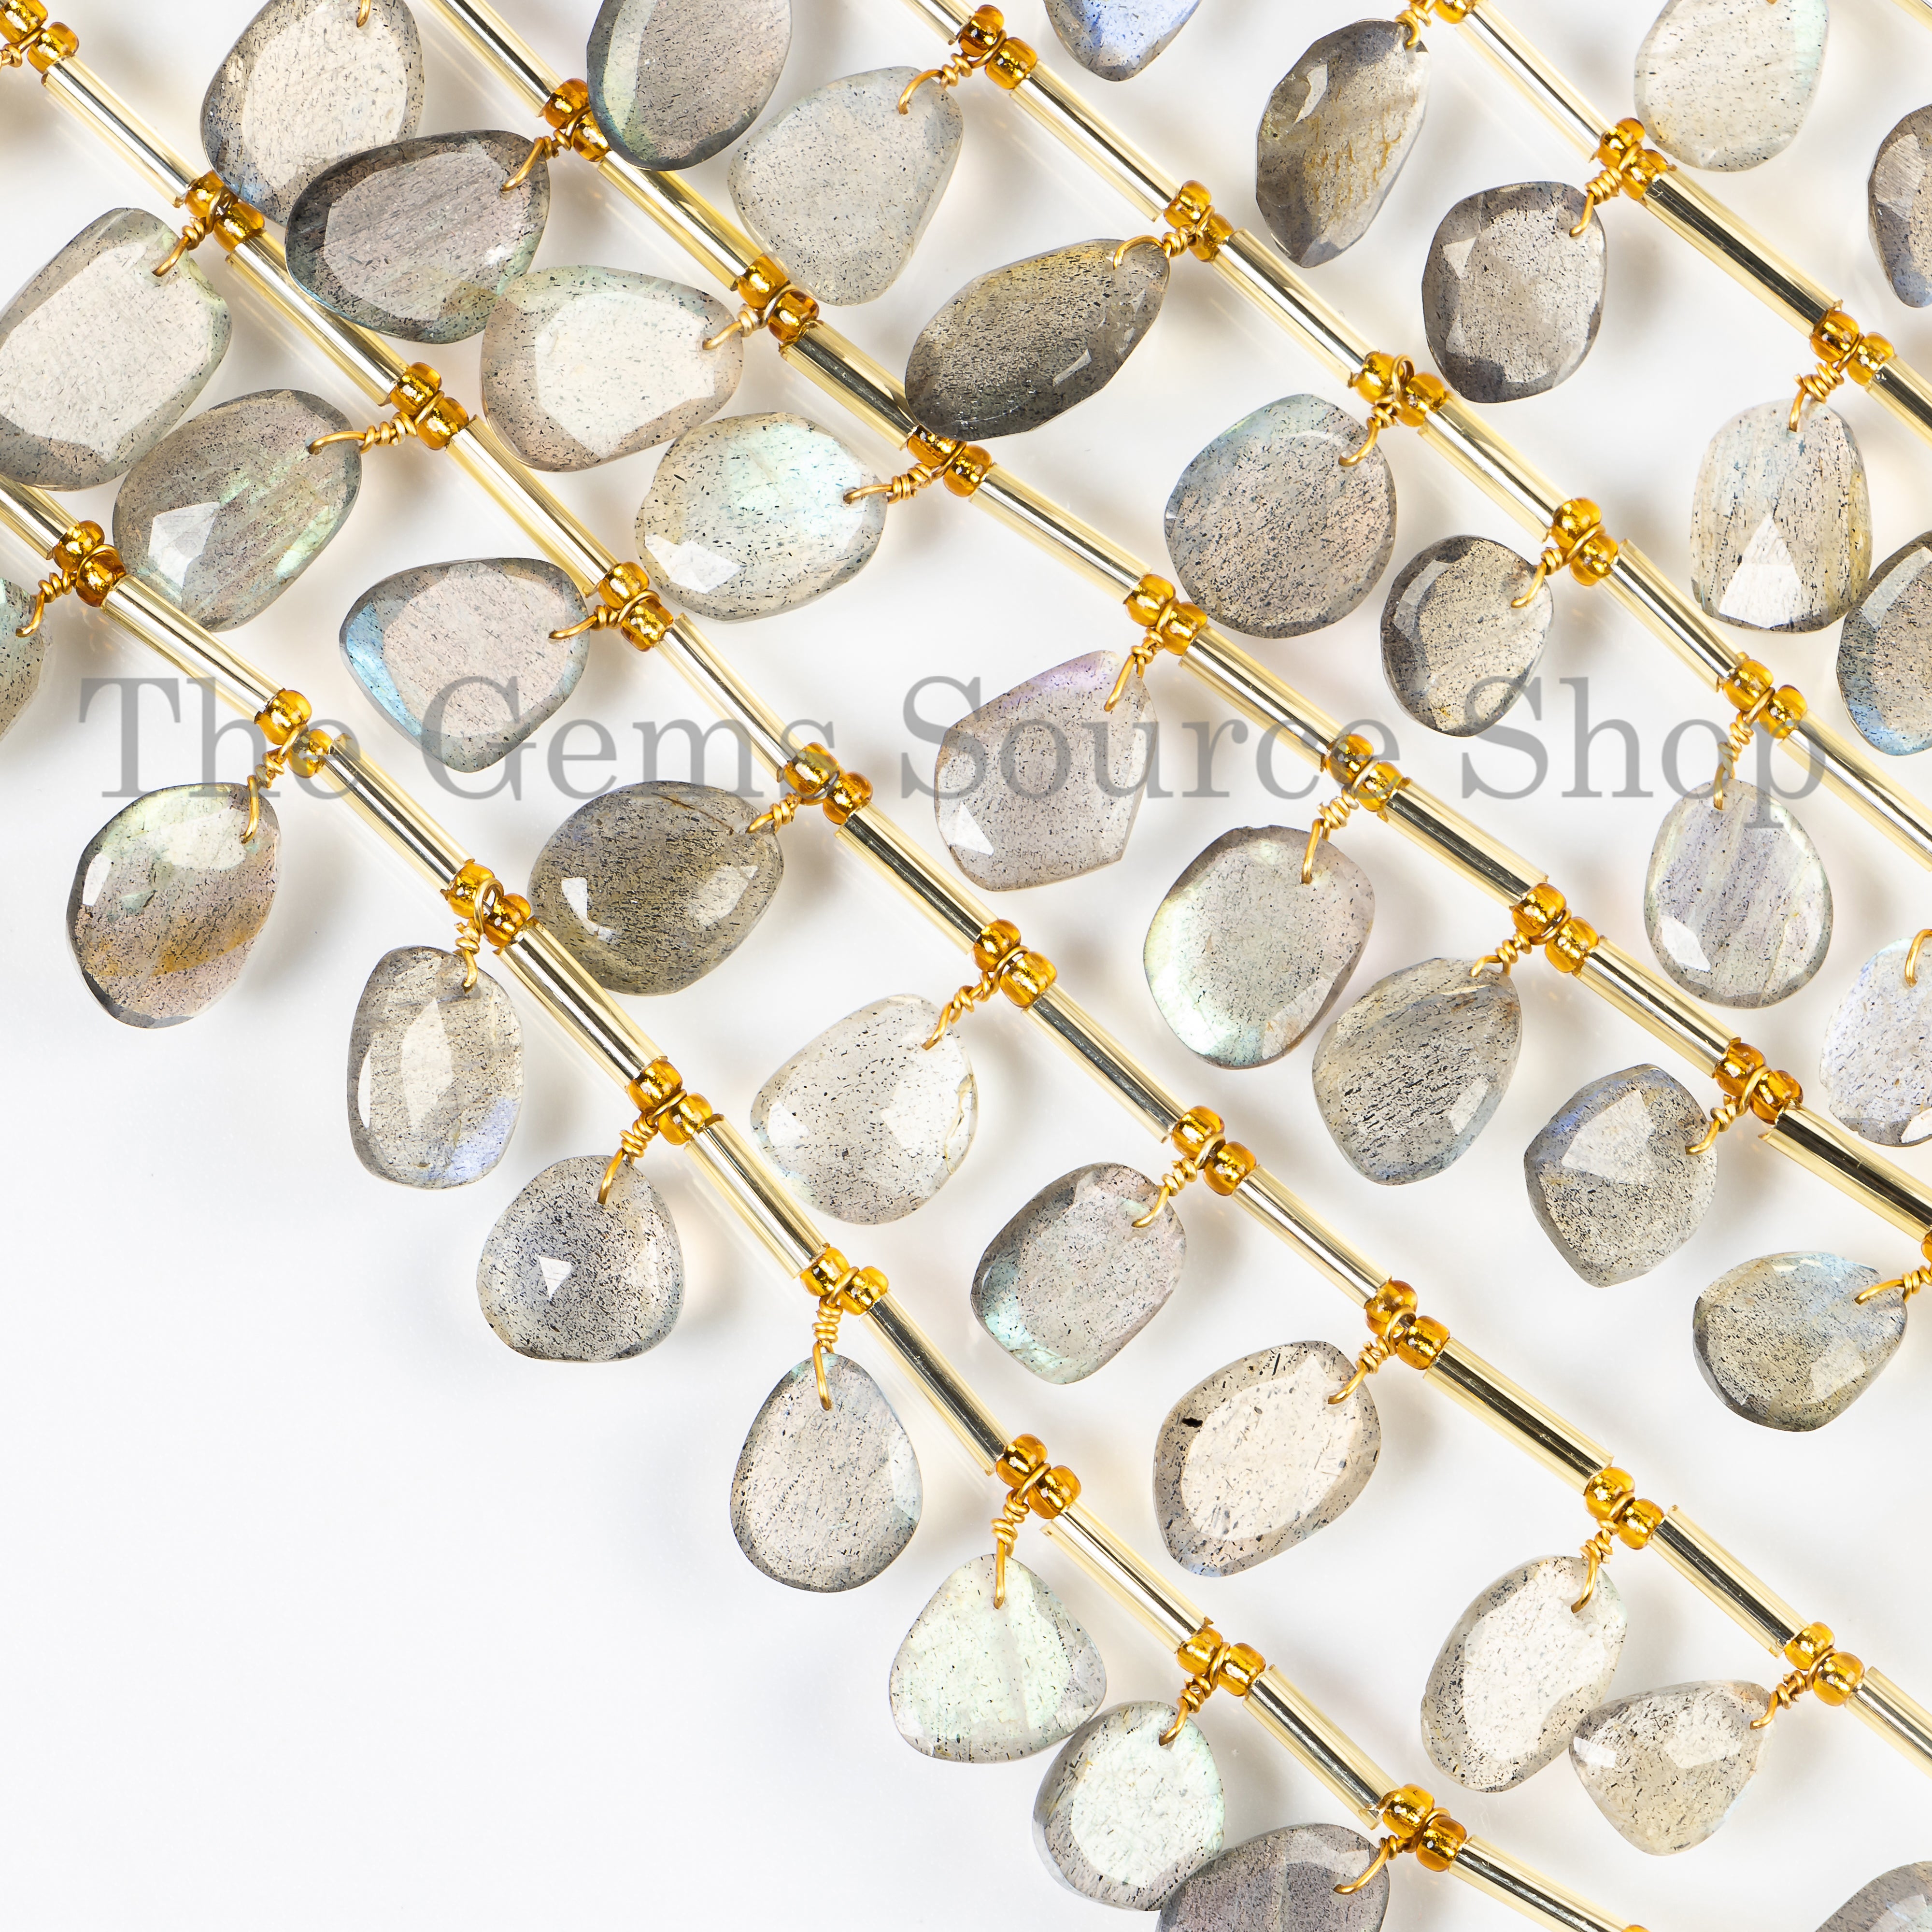 Labradorite Front to Back Beads, Labradorite Briolette, Fancy Drill Beads, Rose Cut Beads, Face Drill Beads, Fancy Beads, Faceted Cabs